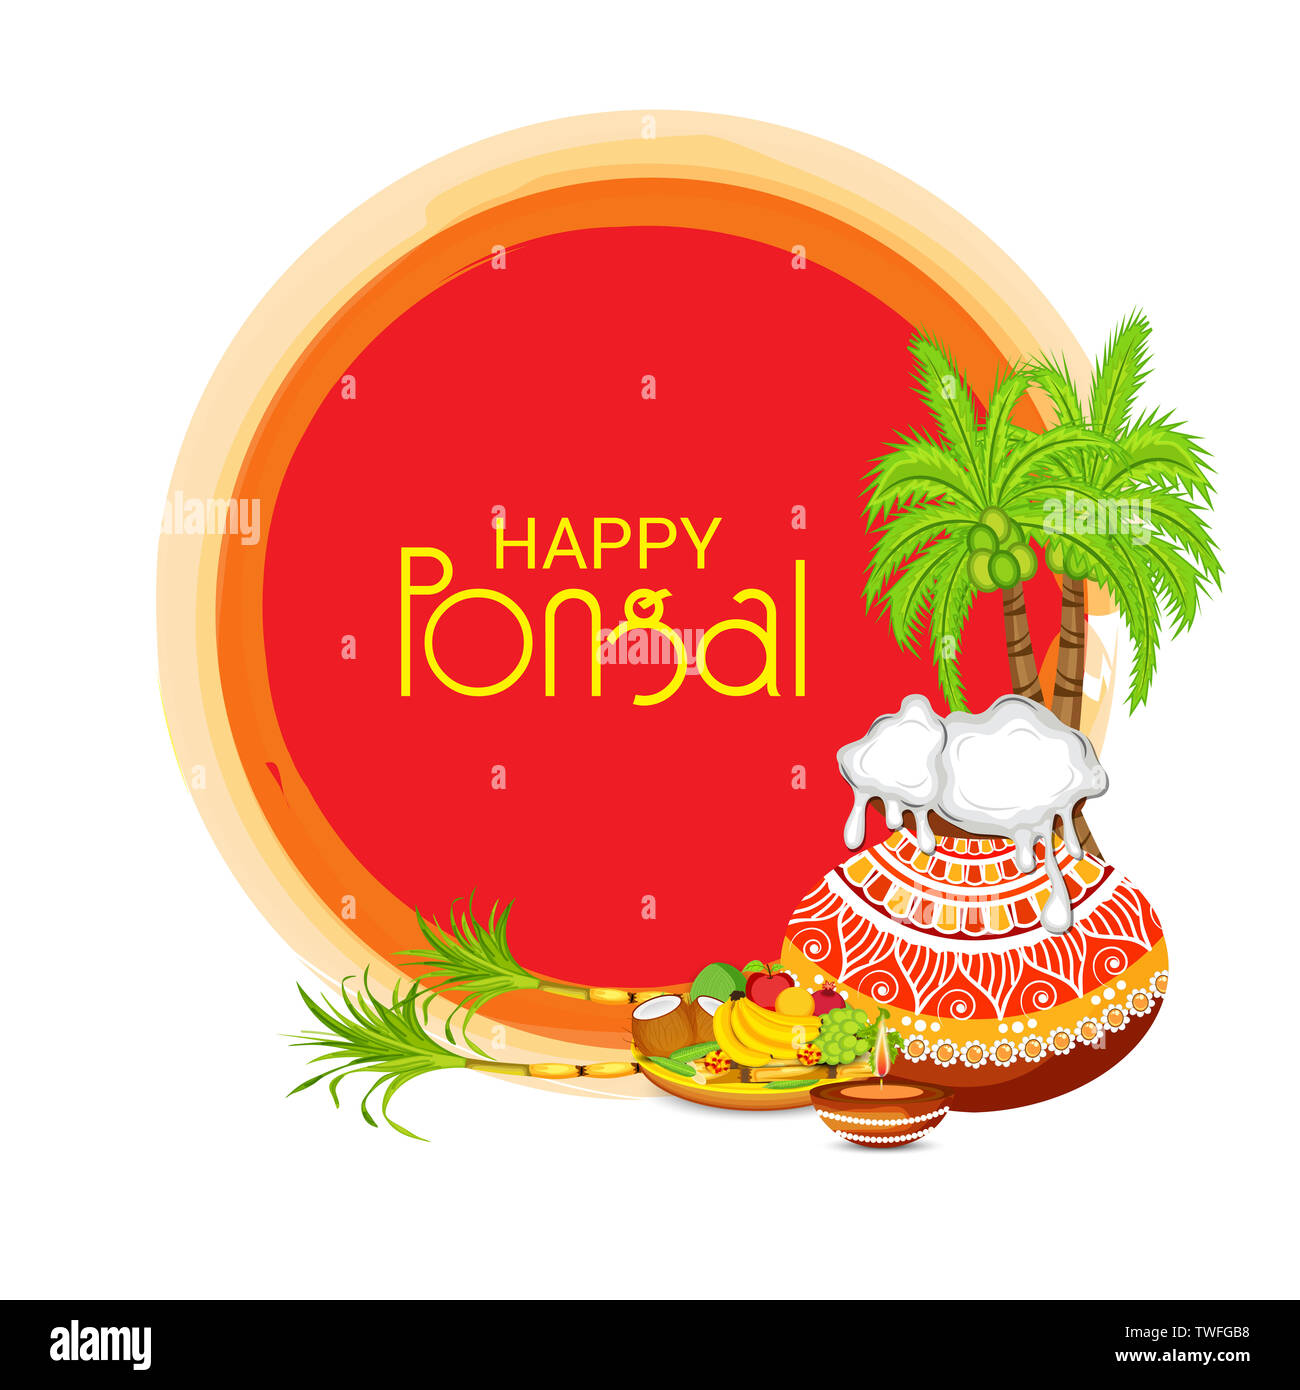 illustration of a background for Happy Pongal Stock Photo - Alamy